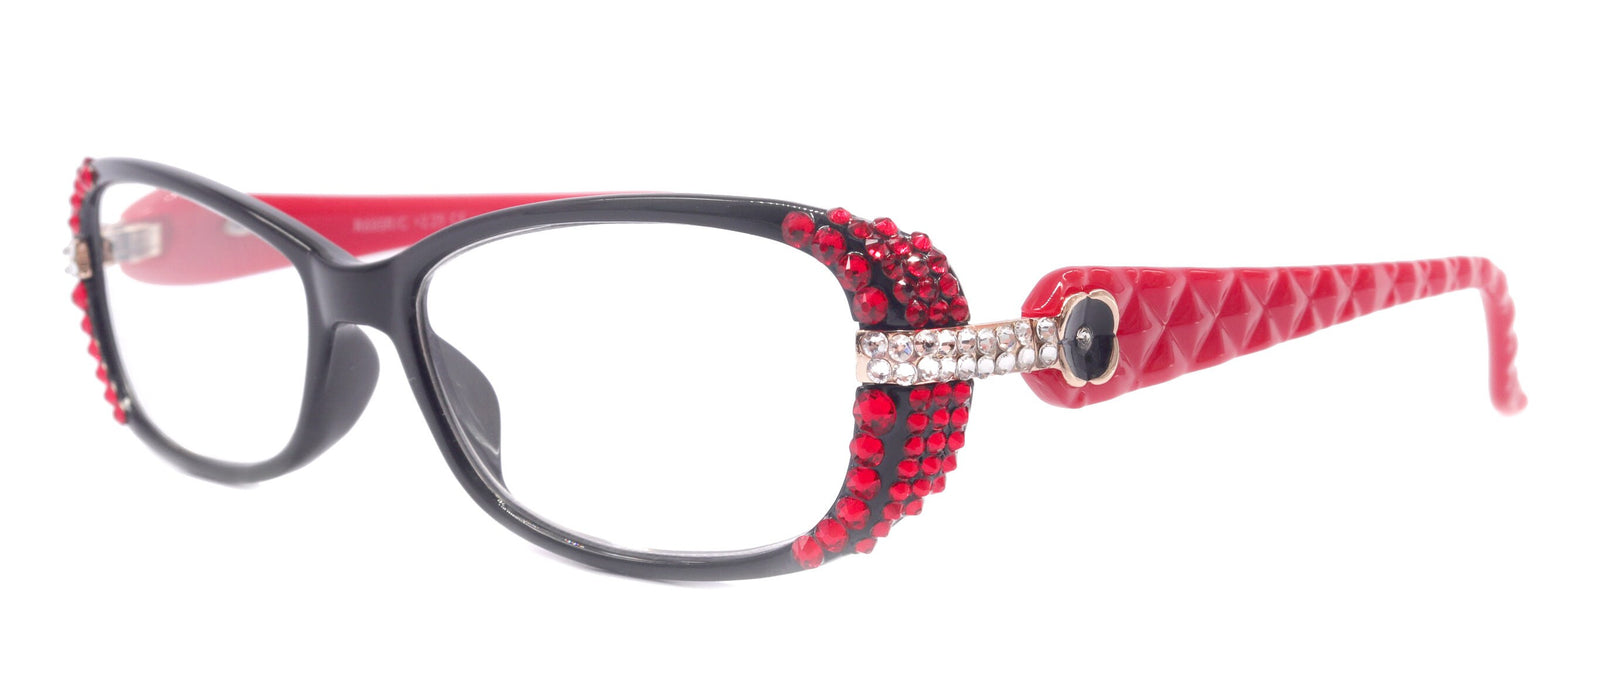 Glamour Quilted, (Bling) Reading Glasses For Women Adorned W (L. Siam, Clear) +1.25..+3.50 (Red, Black) NY Fifth Avenue.